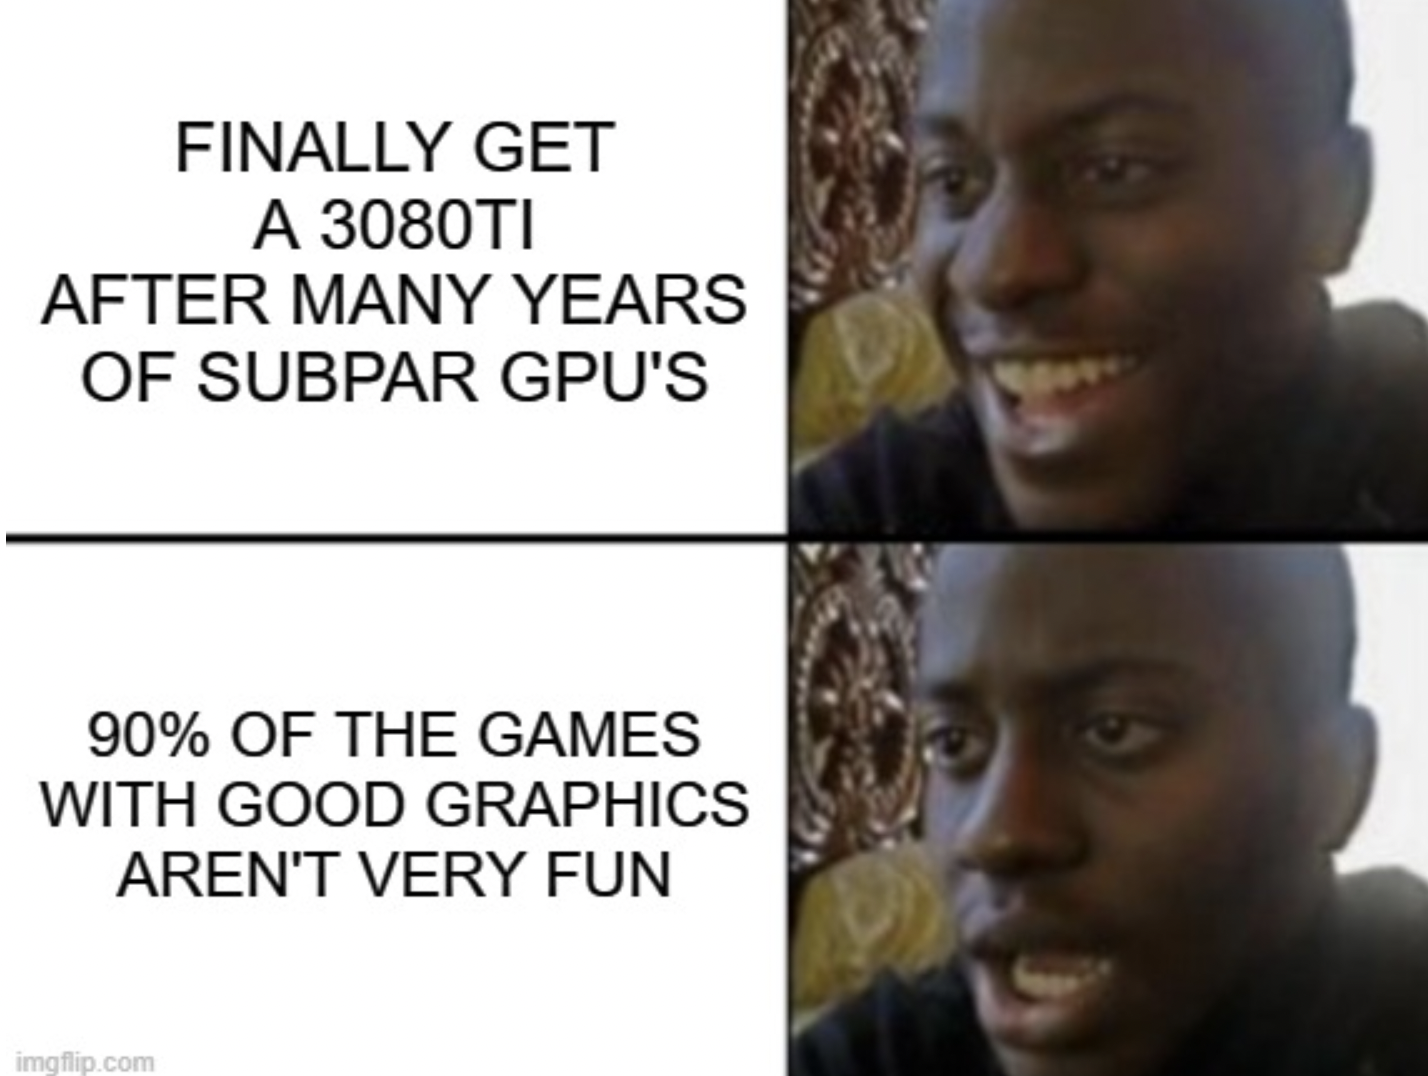 Gaming memes - After Many Years Of Subpar Gpu Of The Games With Good Graphics Aren'T Very Fun